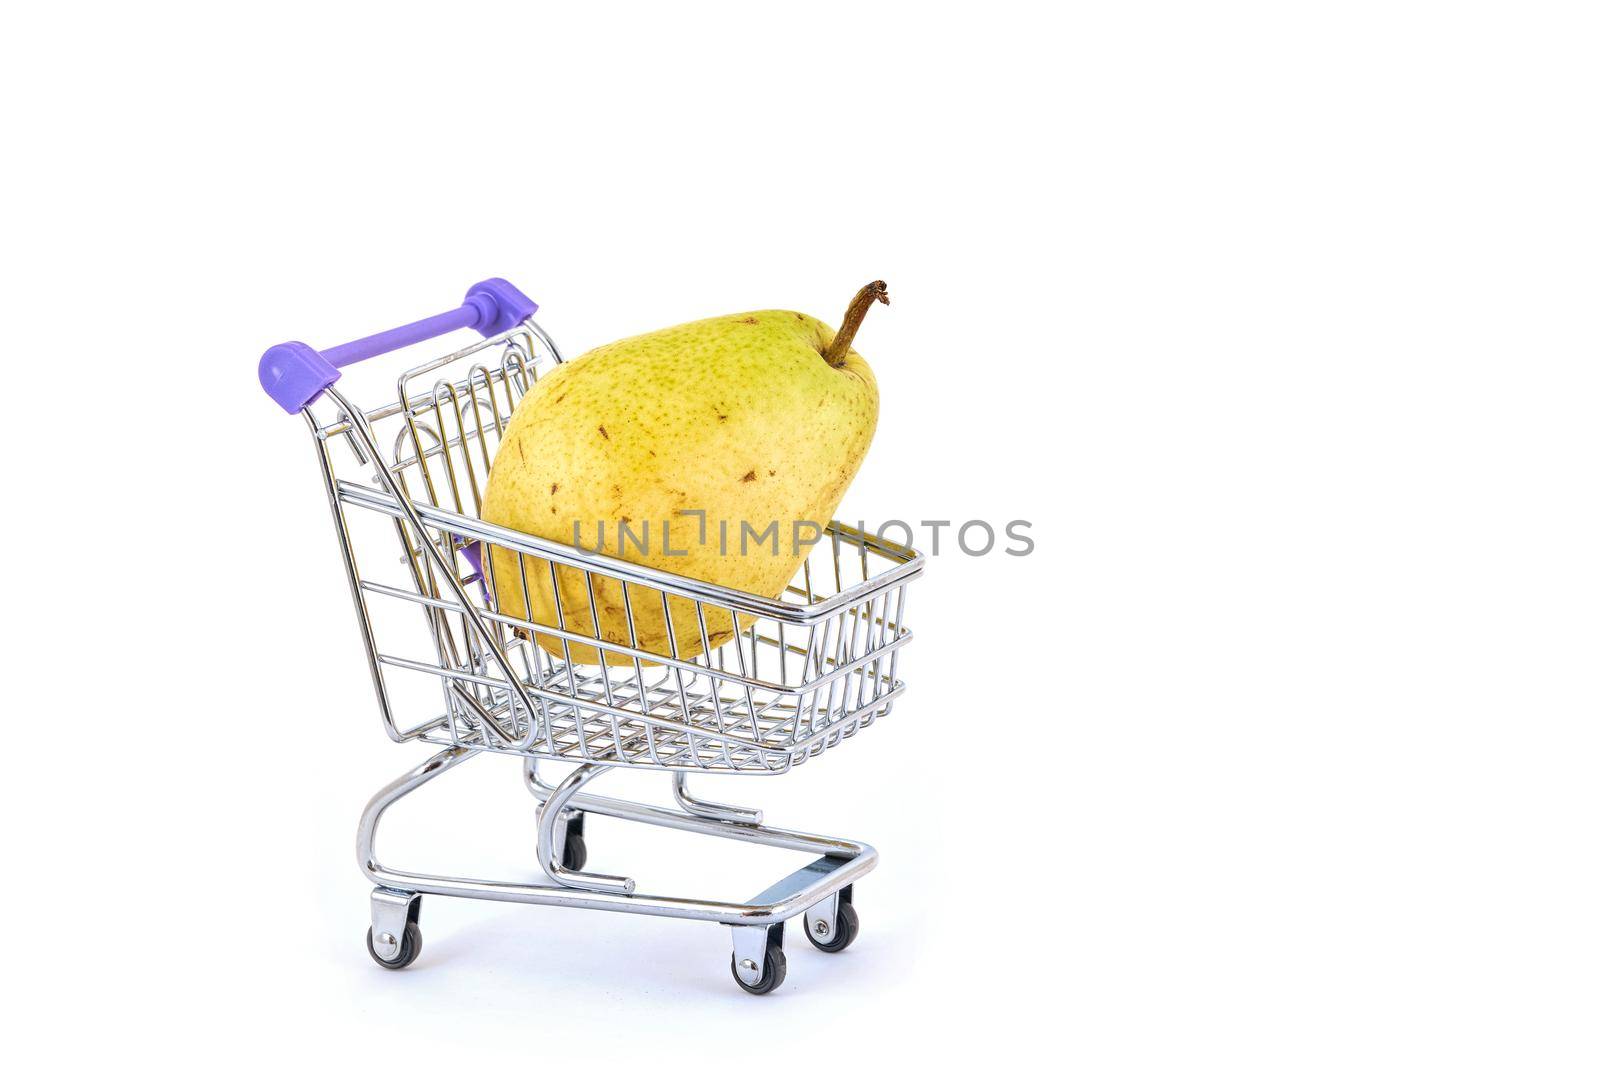 Beautiful ripe pear lies in a shopping cart isolated on a white background. Conceptual image